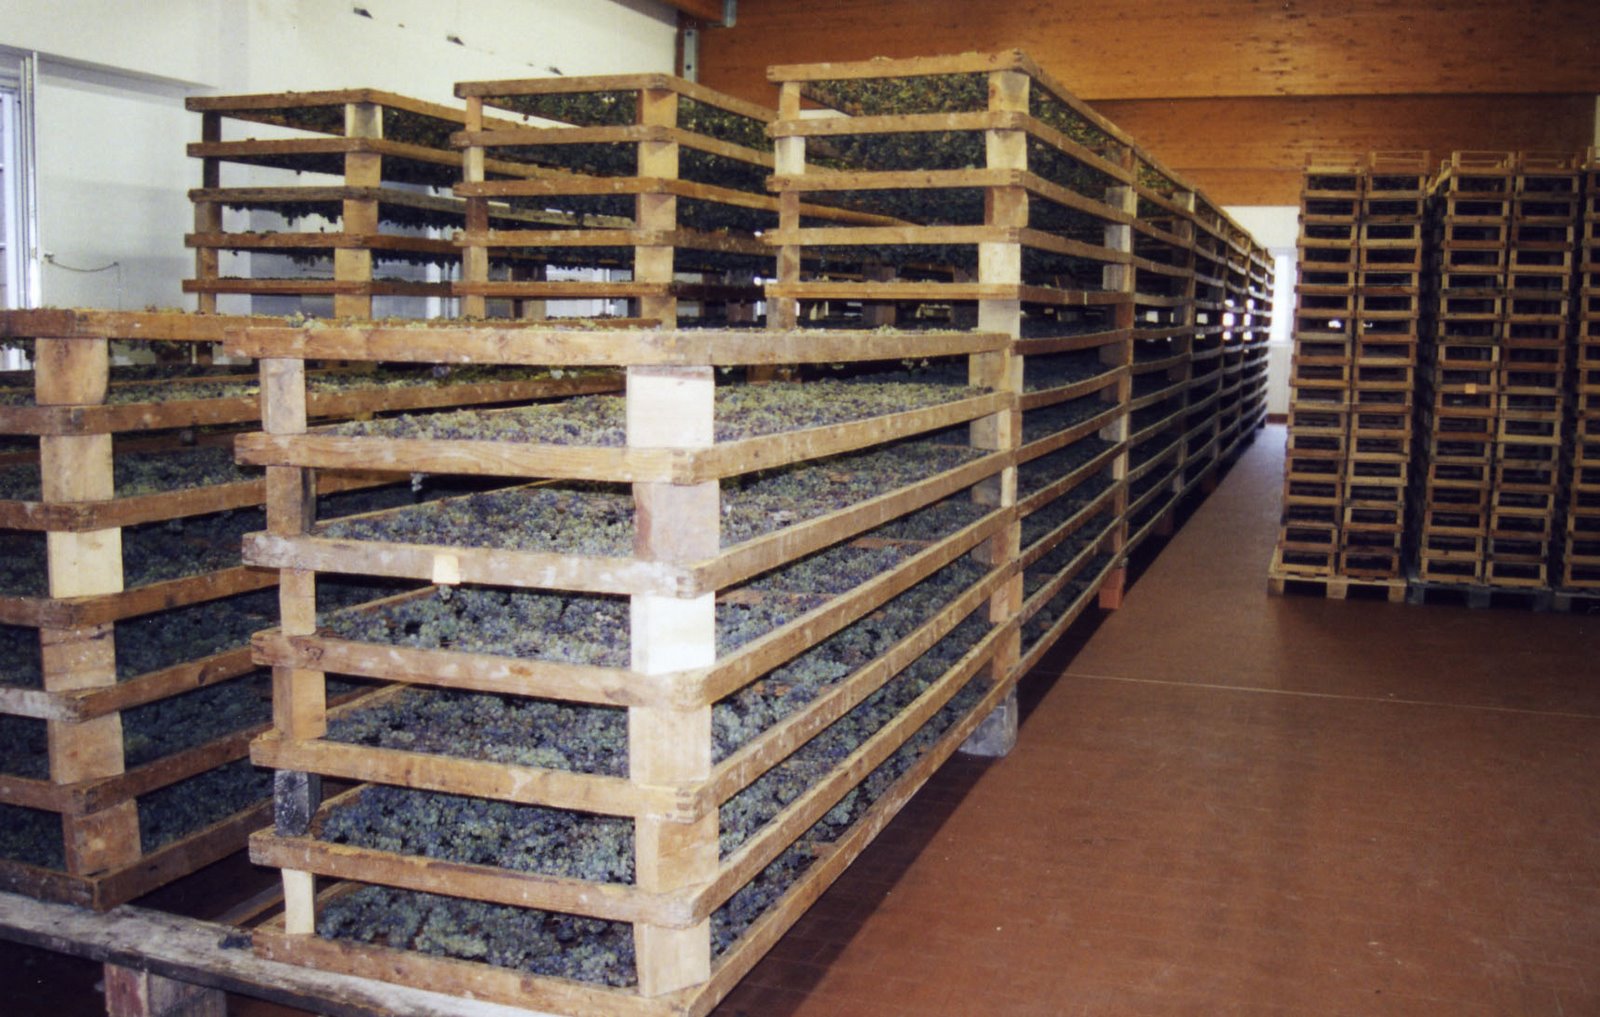 [Grapes+drying+for+Passito.jpg]